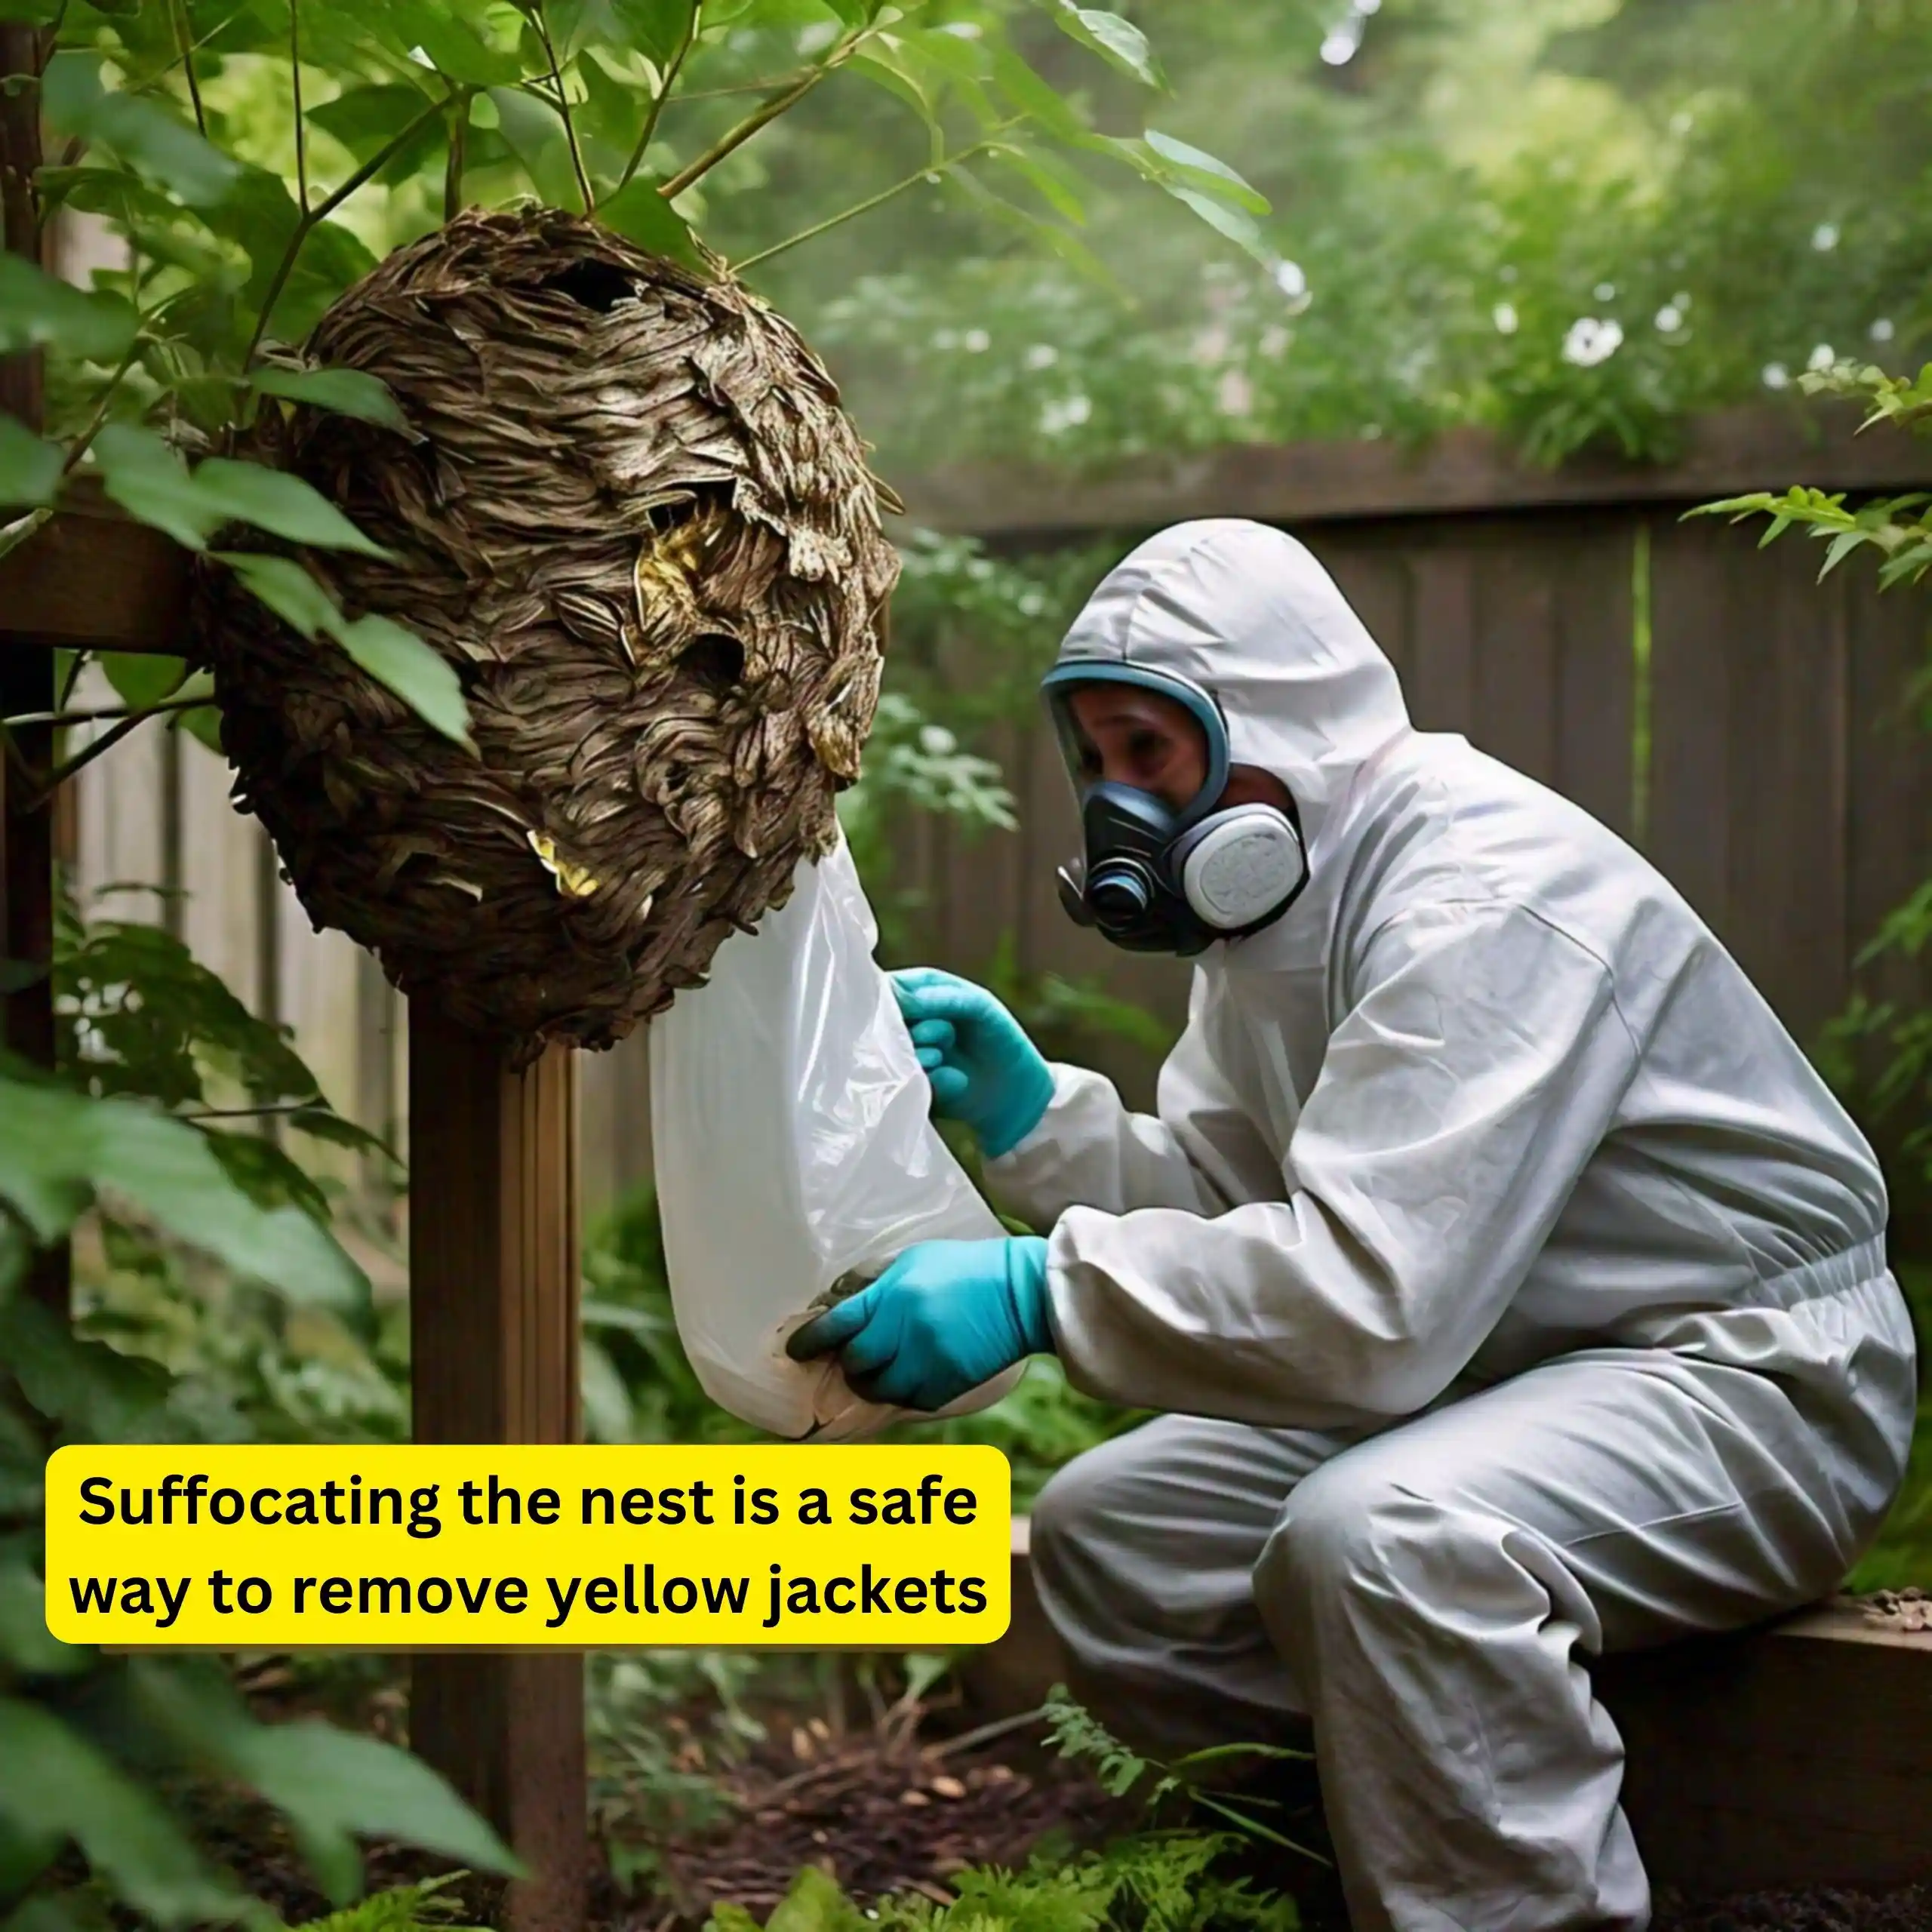 Suffocating the nest is a safe way to remove yellow jackets